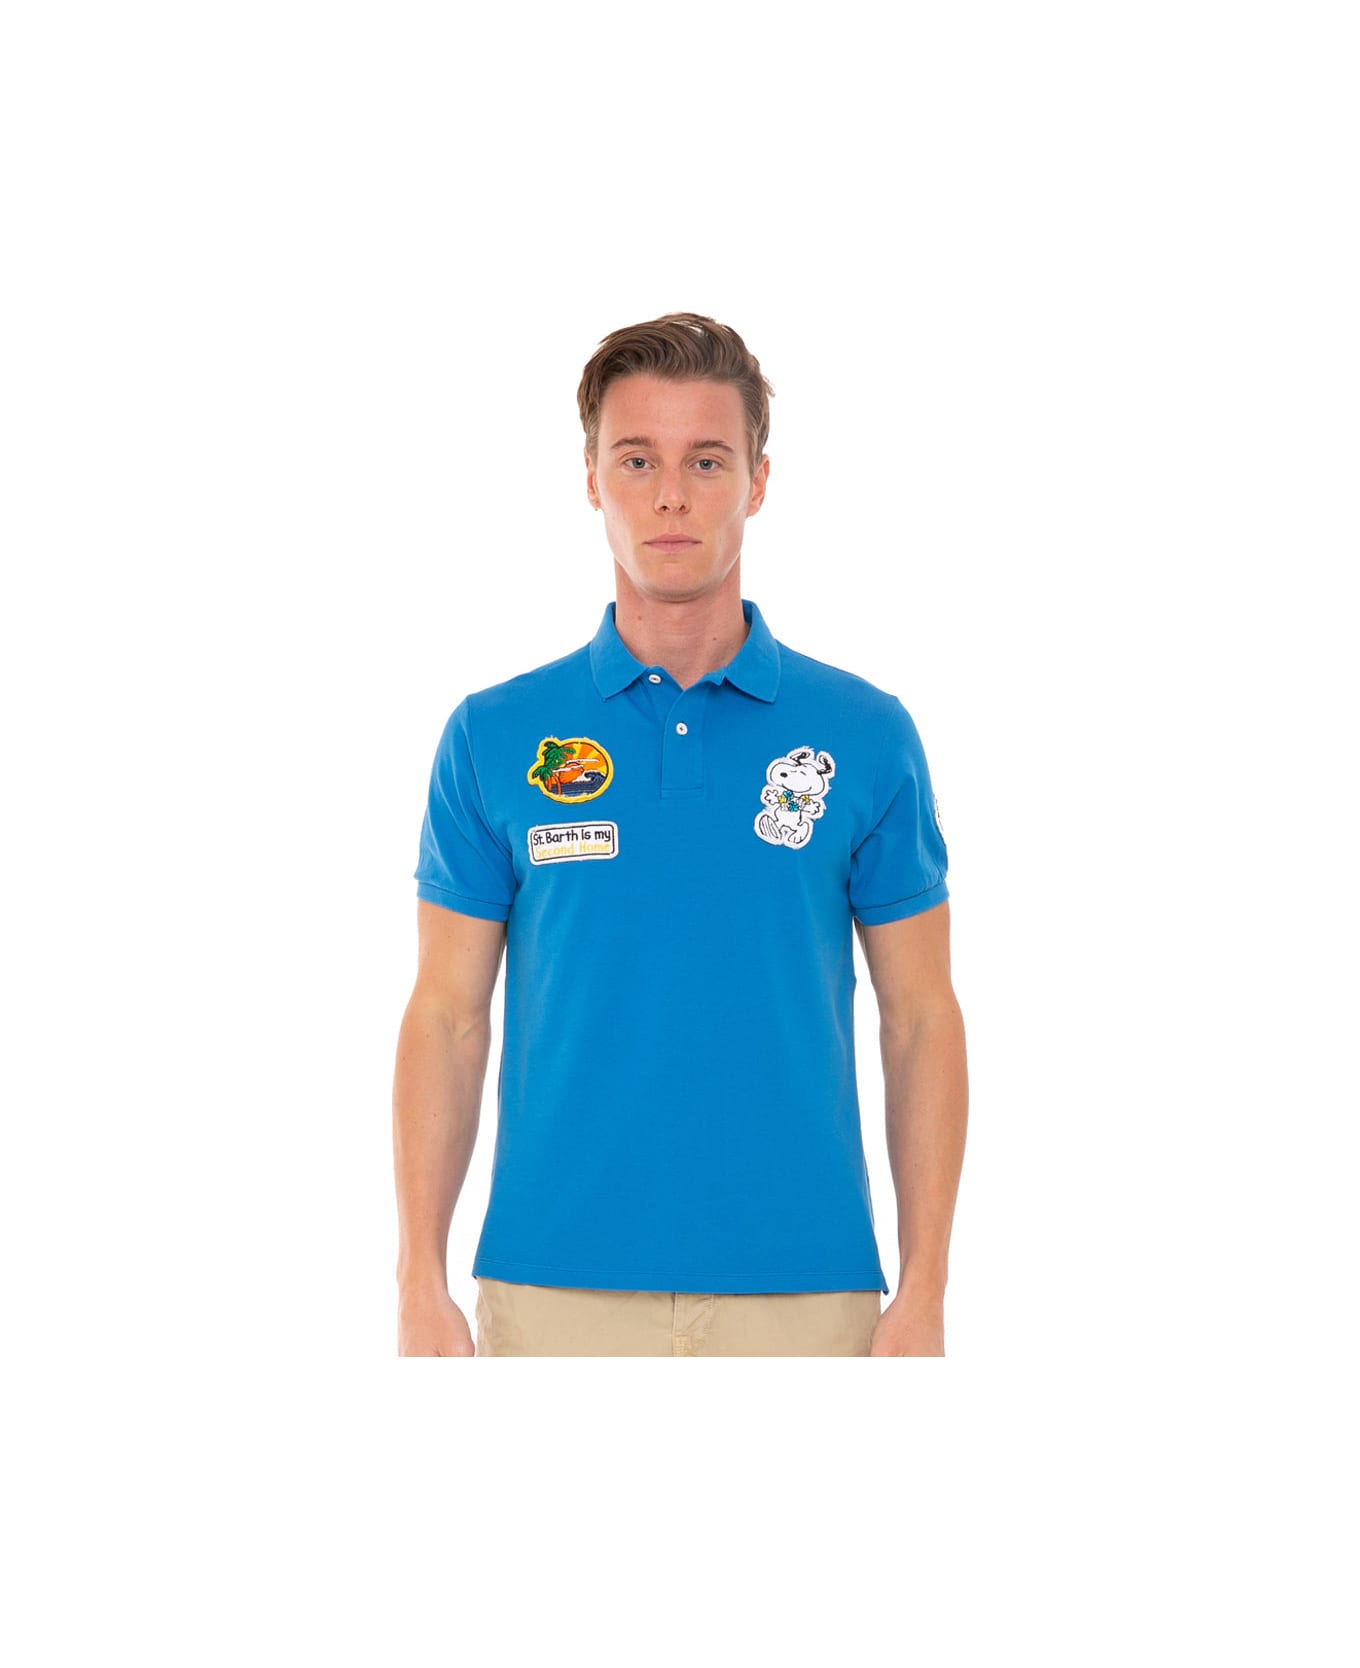 MC2 Saint Barth Man Stretch Piquet Polo With Snoopy Patch | Snoopy - Peanuts Special Edition - BLUE